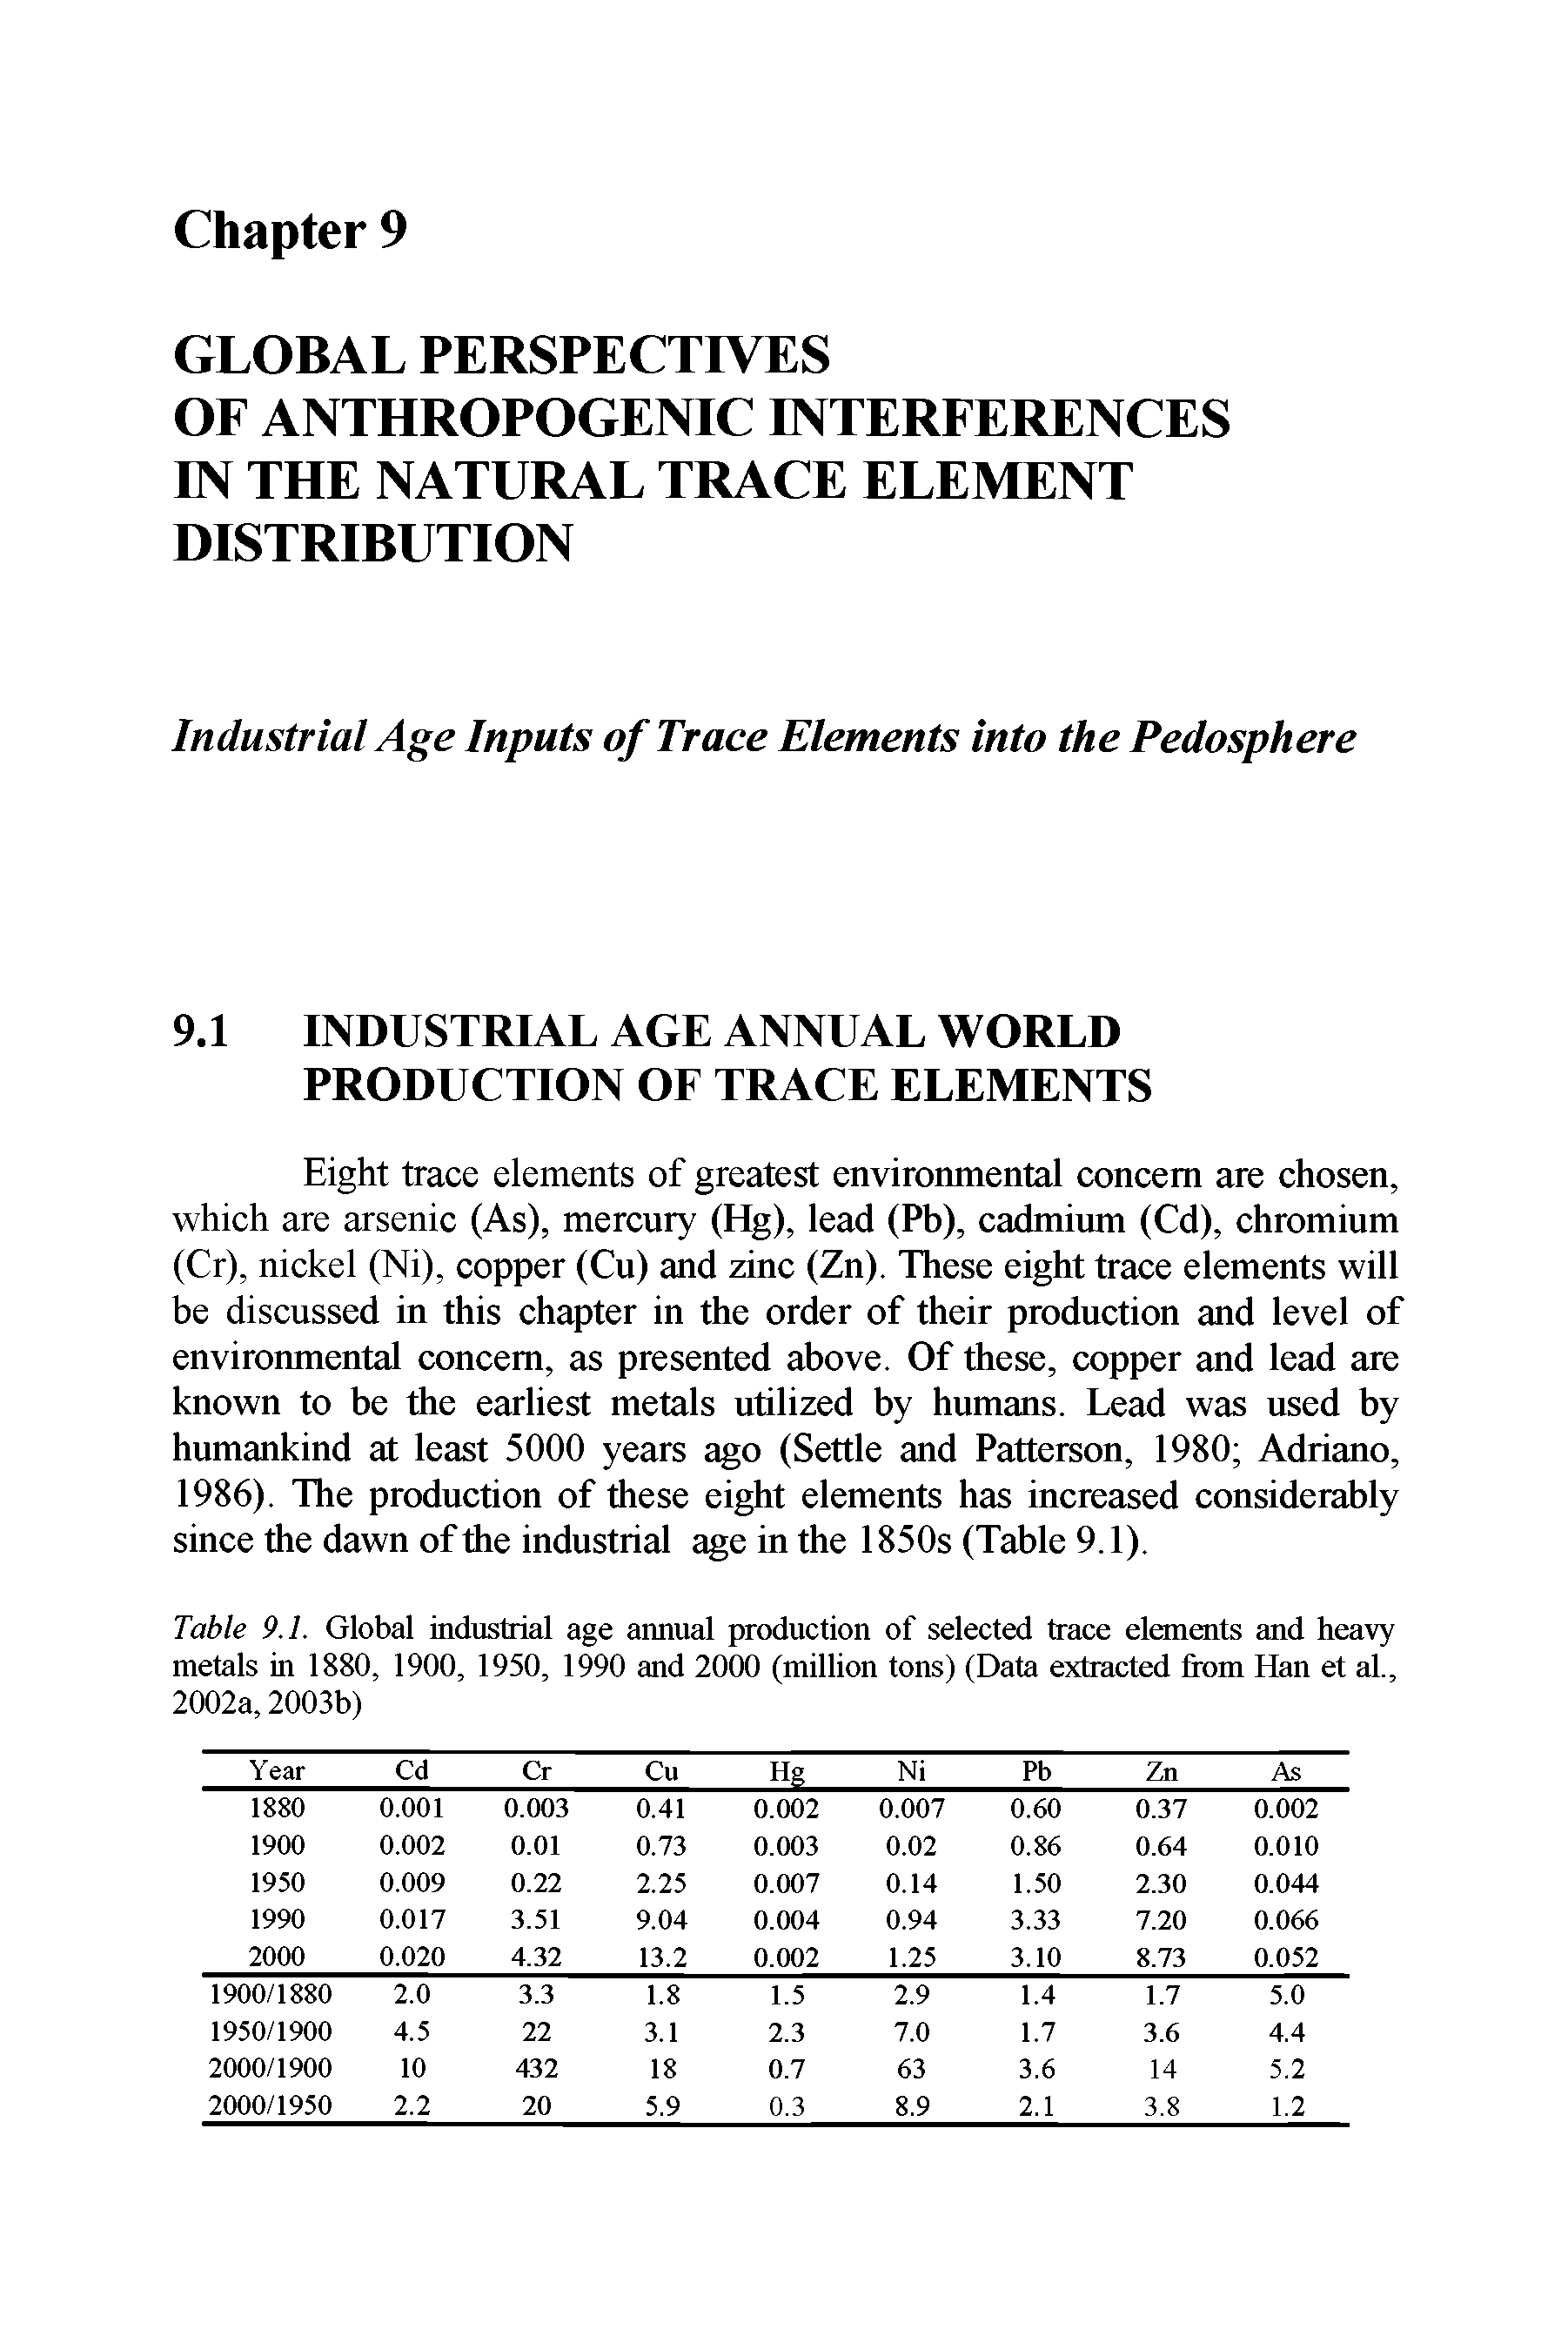 Table 9.1. Global industrial age annual production of selected trace elements and heavy metals in 1880, 1900, 1950, 1990 and 2000 (million tons) (Data extracted from Han et al., 2002a, 2003b)...